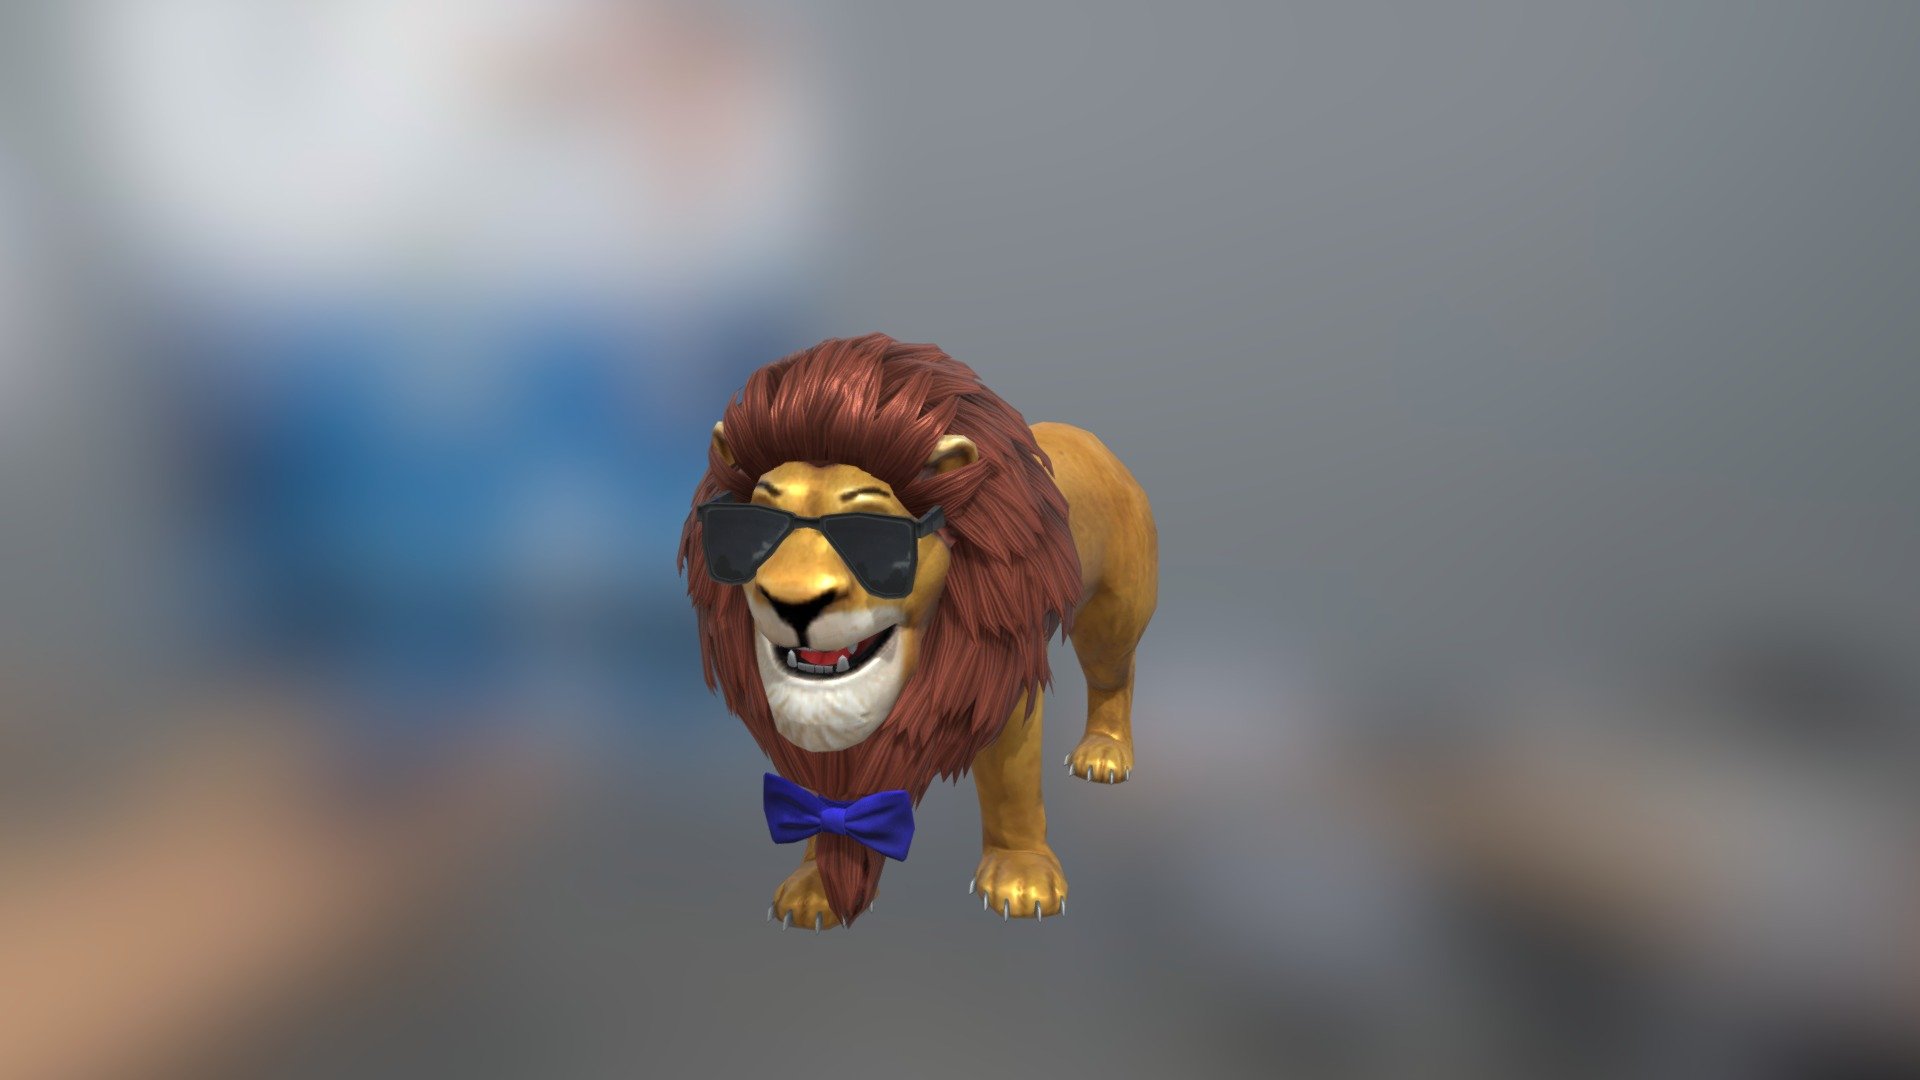 Lion Cartoon 3D Model with Animation
High Quality Lion Cartoon 3D Model
Ready for your Animation, Game, etc.
================================================
File Format:
FBX FILE
&amp;
OBJ FILE
================================================
Model:
All models is completely UVunwrapped.
The display layer has been clearly set up.
================================================
Texture and shader:
10 high res textures,PBR texture ,the format is jpg png.
1080p Resolution Textures
================================================
Render:
3ds Max
The preview images are rendered with 3ds Max
Lights and Render setting are included
================================================
Thanks for viewing our 3d models. We will be glad if you will purchase our 3d models - Lion Cartoon 3D Model - 3D model by Aritro-3d (@Aritro3d) 3d model